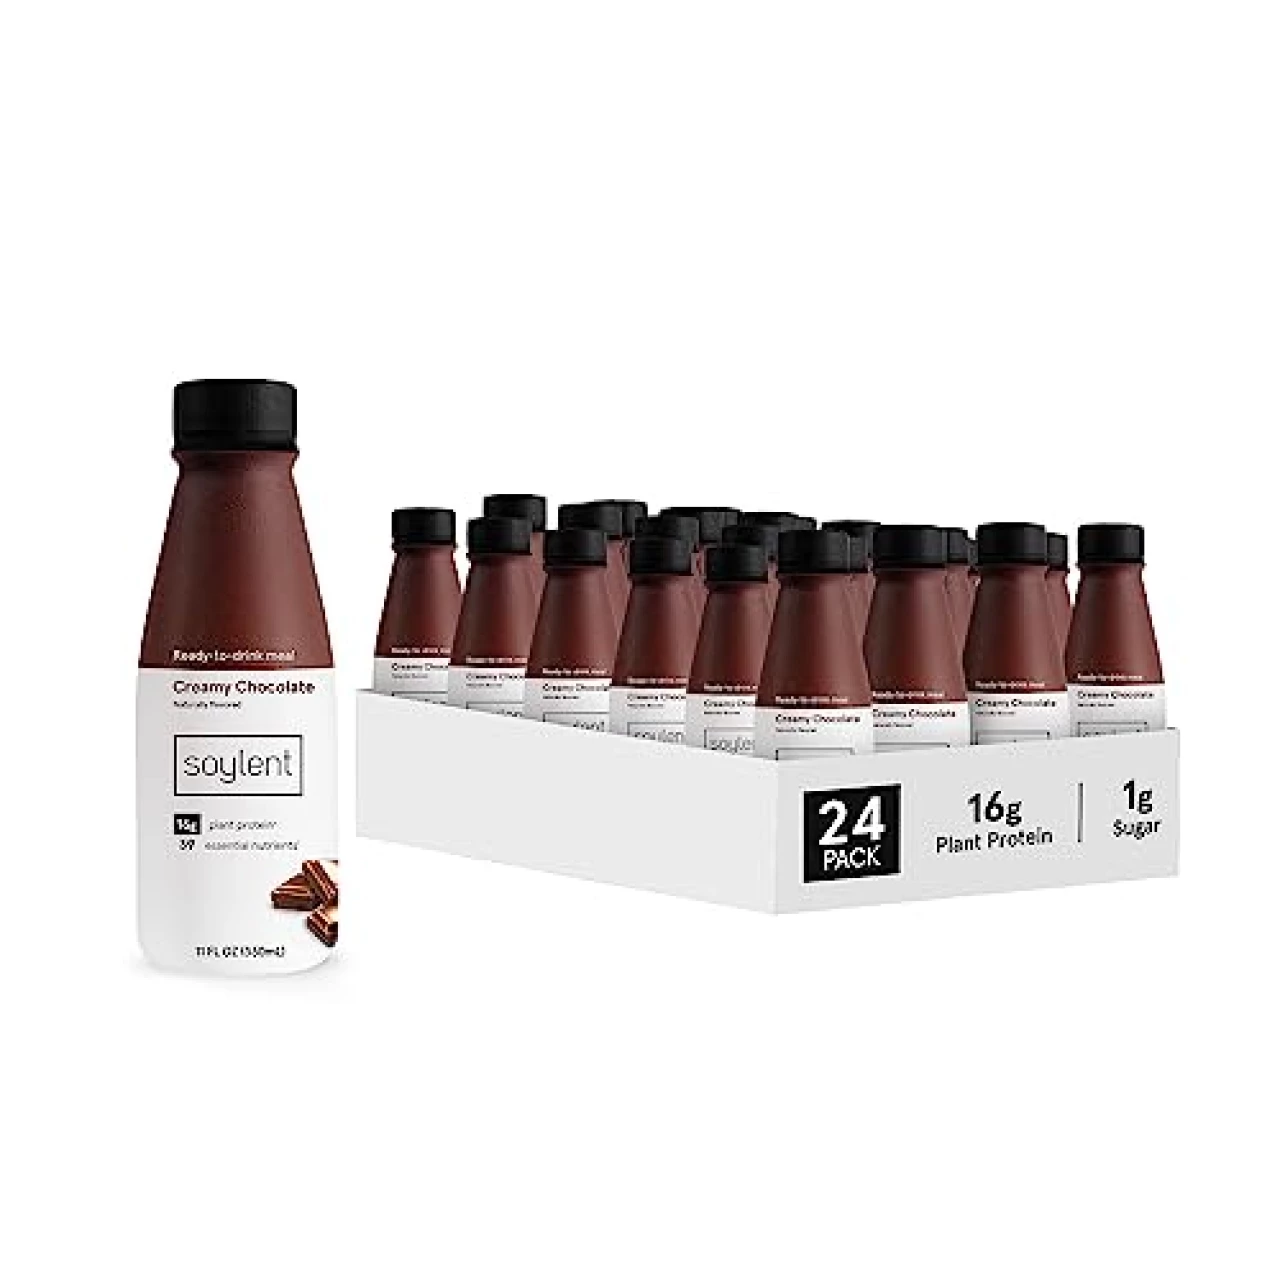 Soylent Creamy Chocolate Meal Replacement Shake